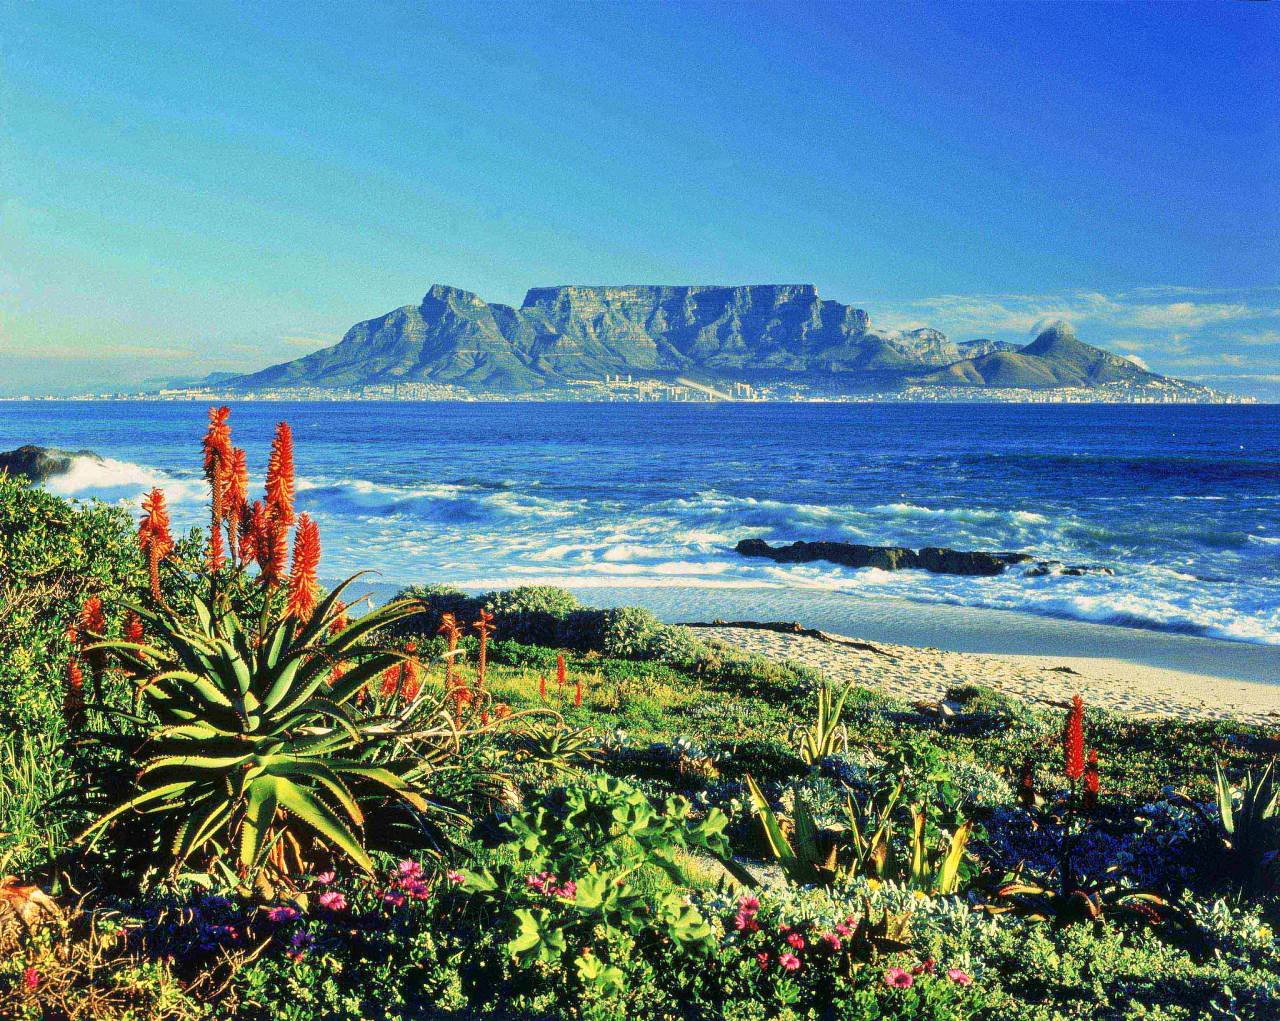 Table Mountain, Cape Town from across Table Bay